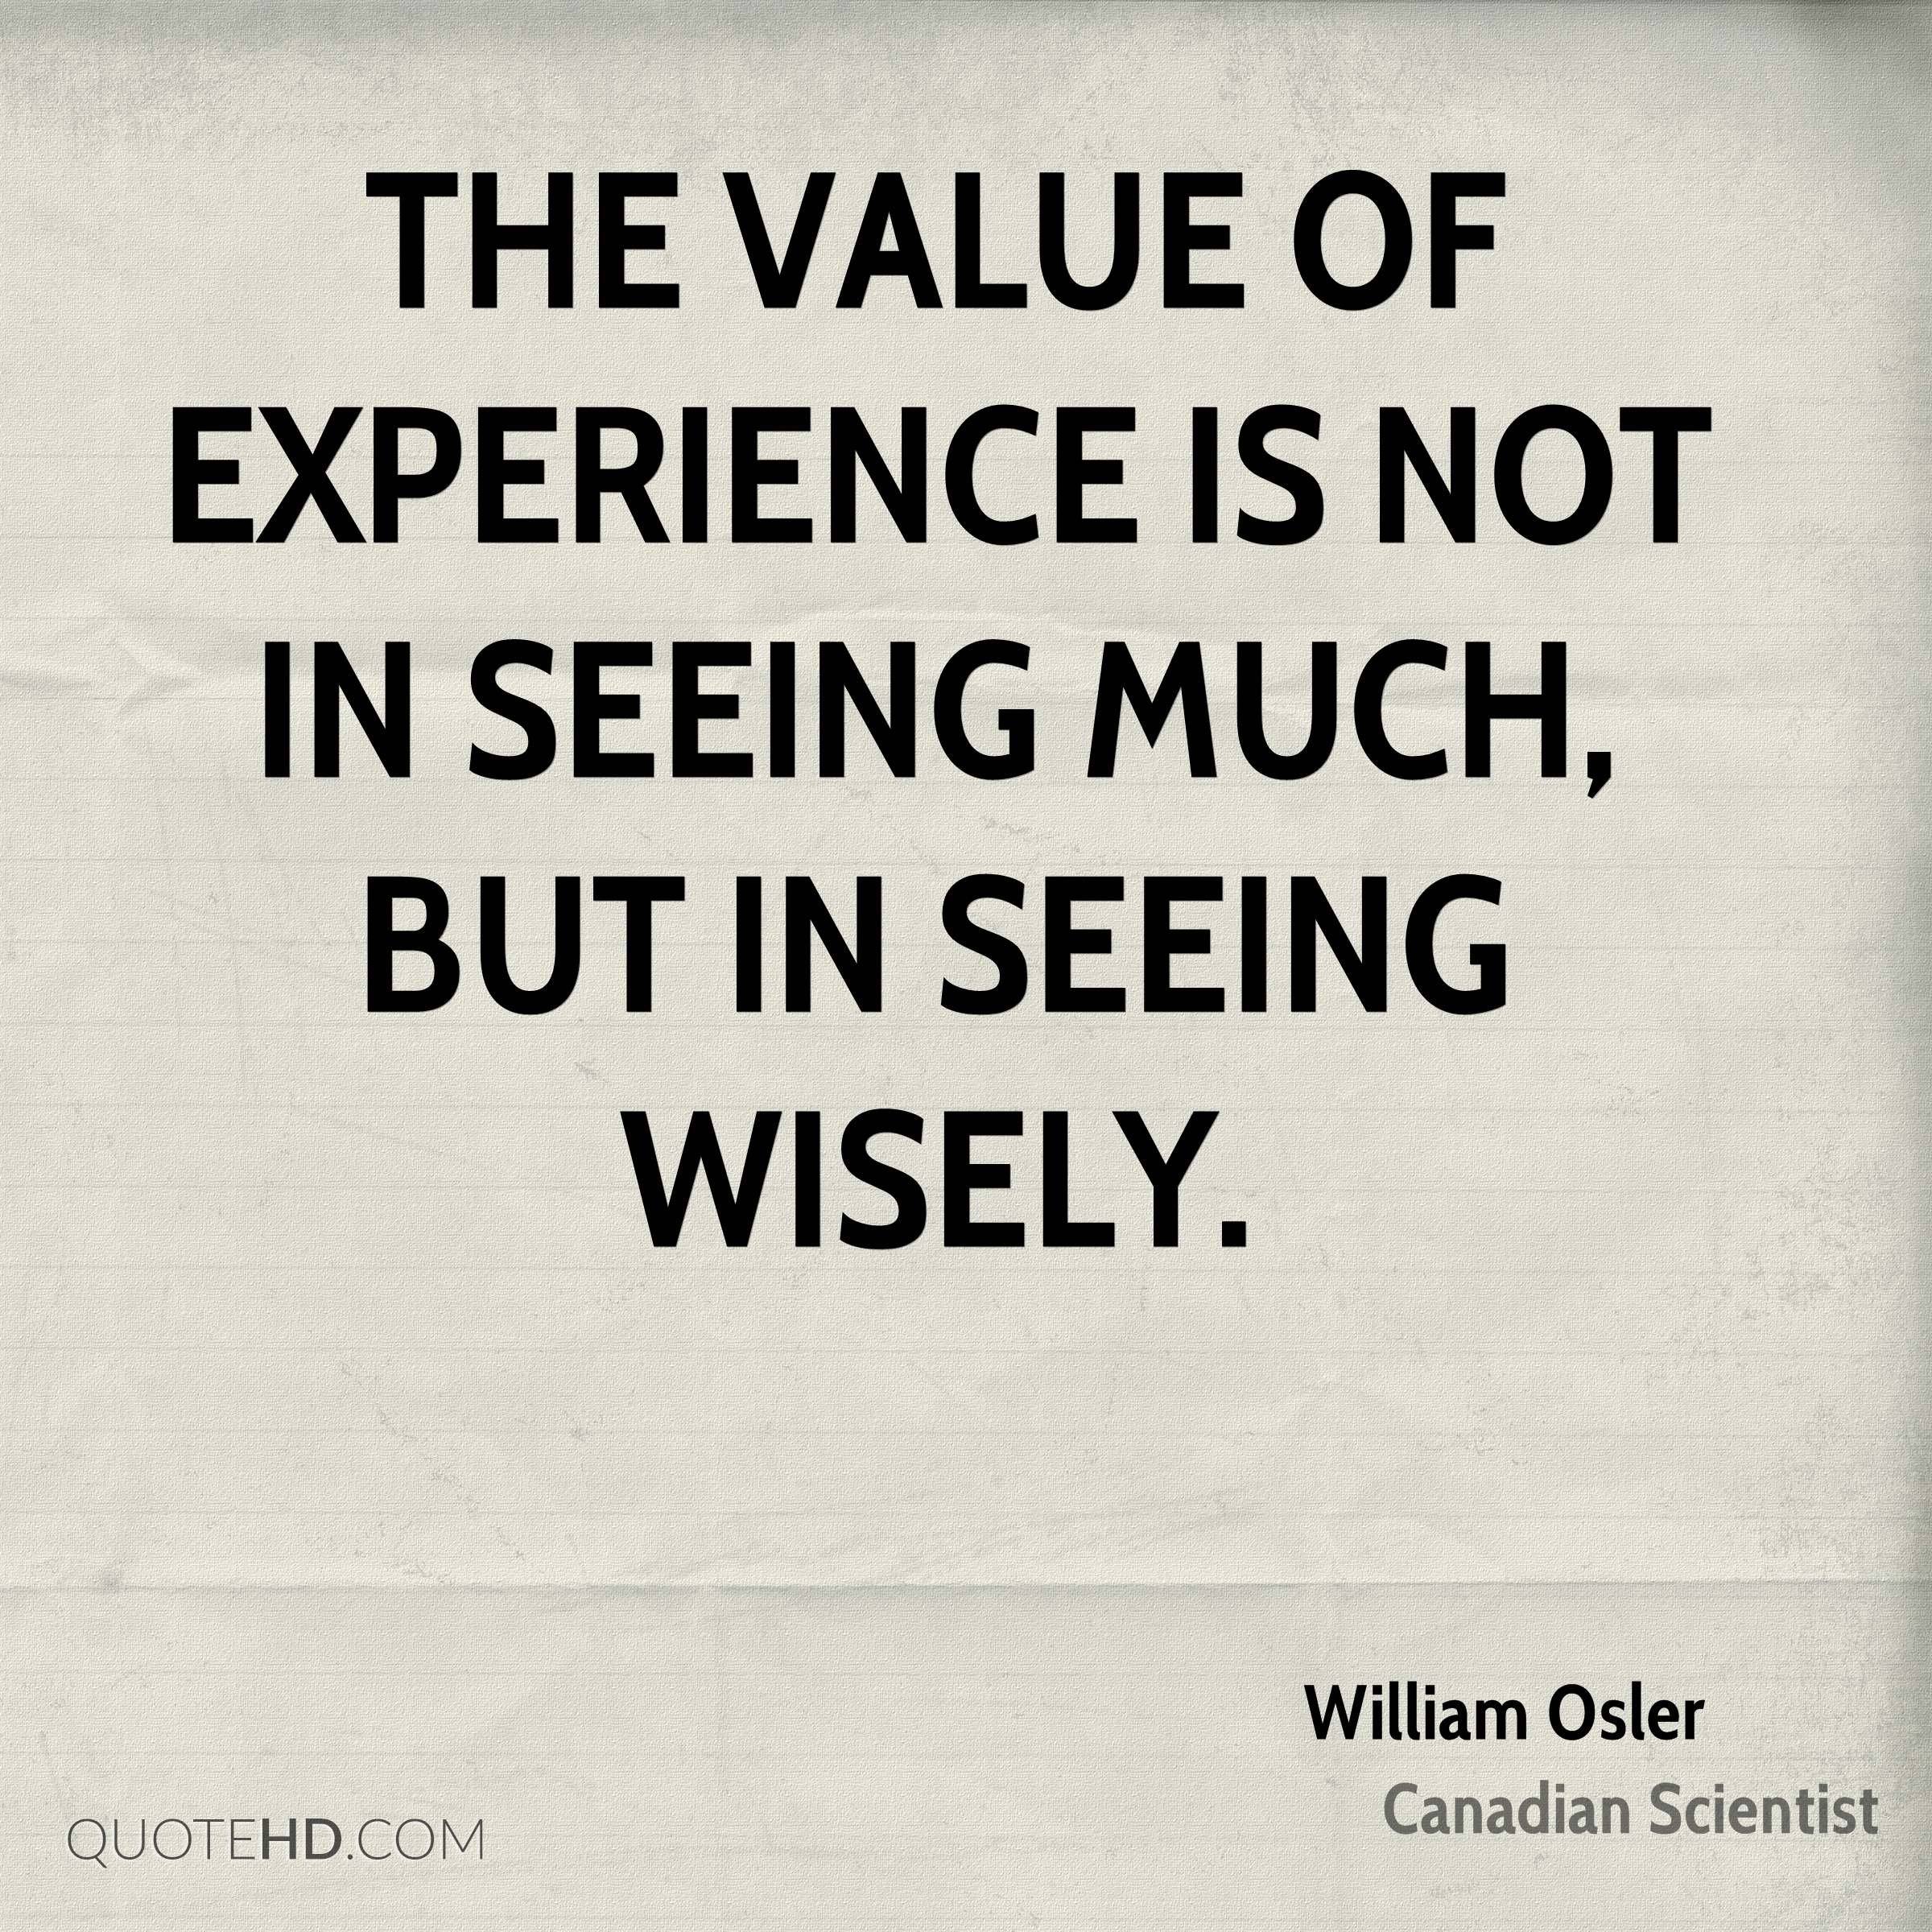 The value of experience is not in seeing much, but in seeing wisely. William Osler